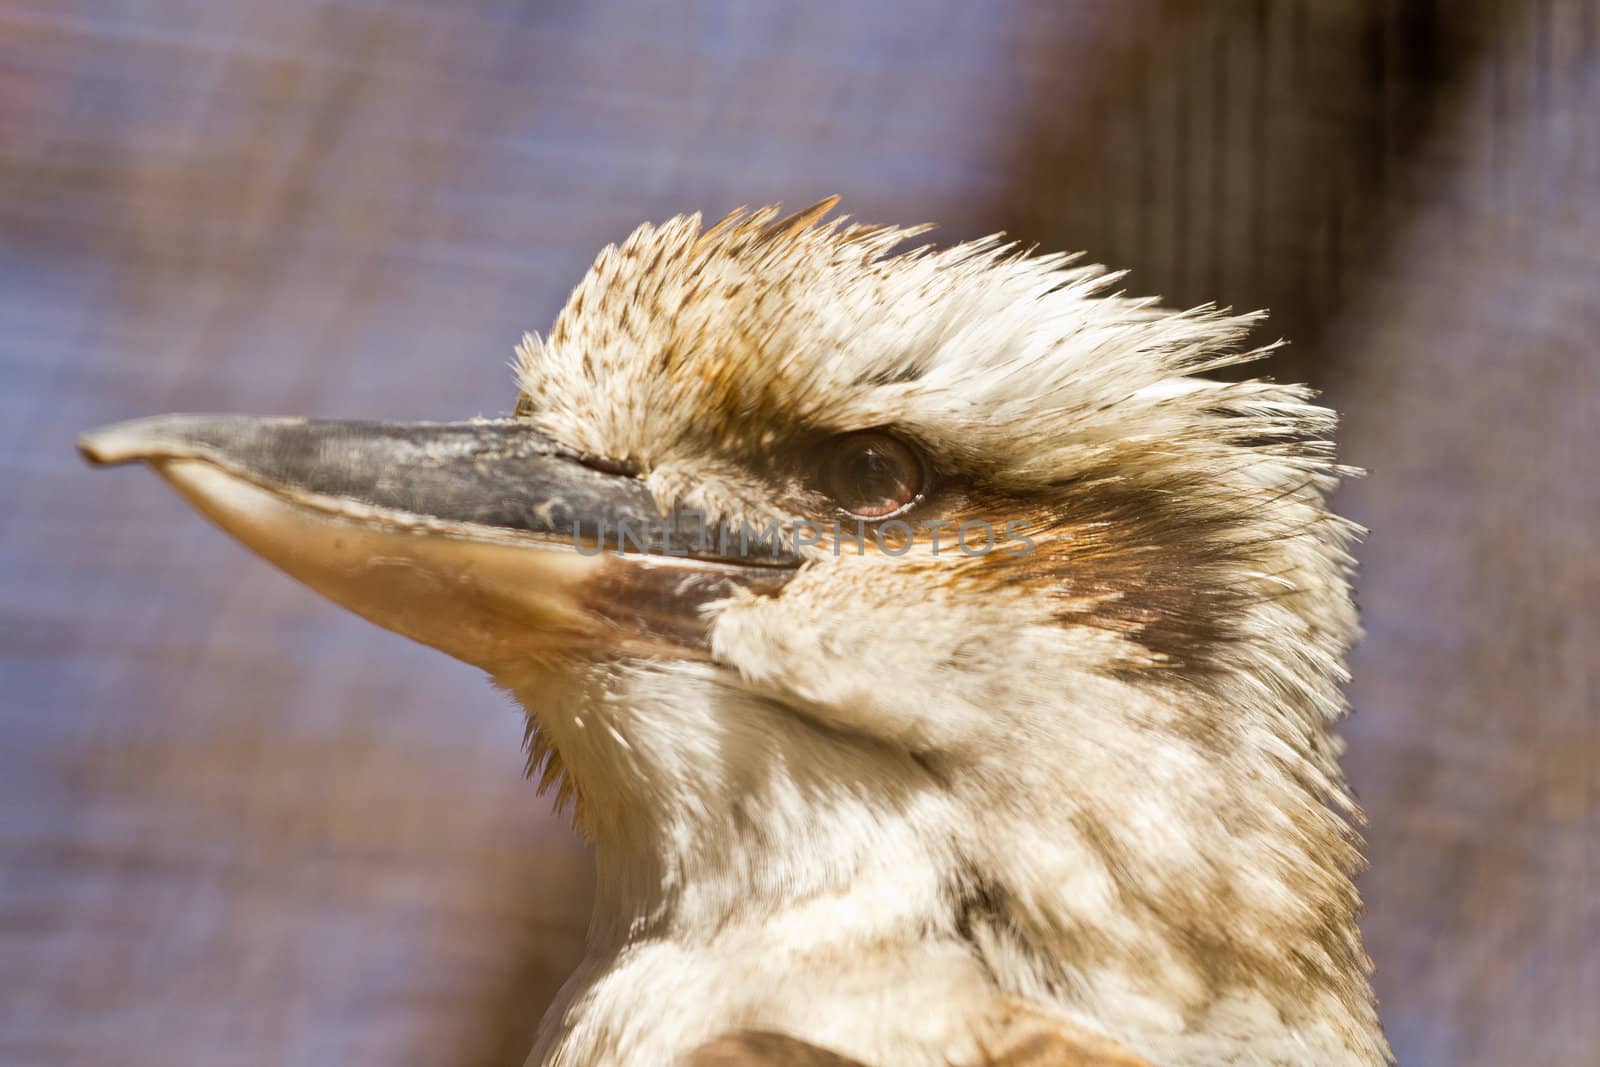 Headshot of a Laughing Kookaburra, a famous Australian bird which make laughter like sounds